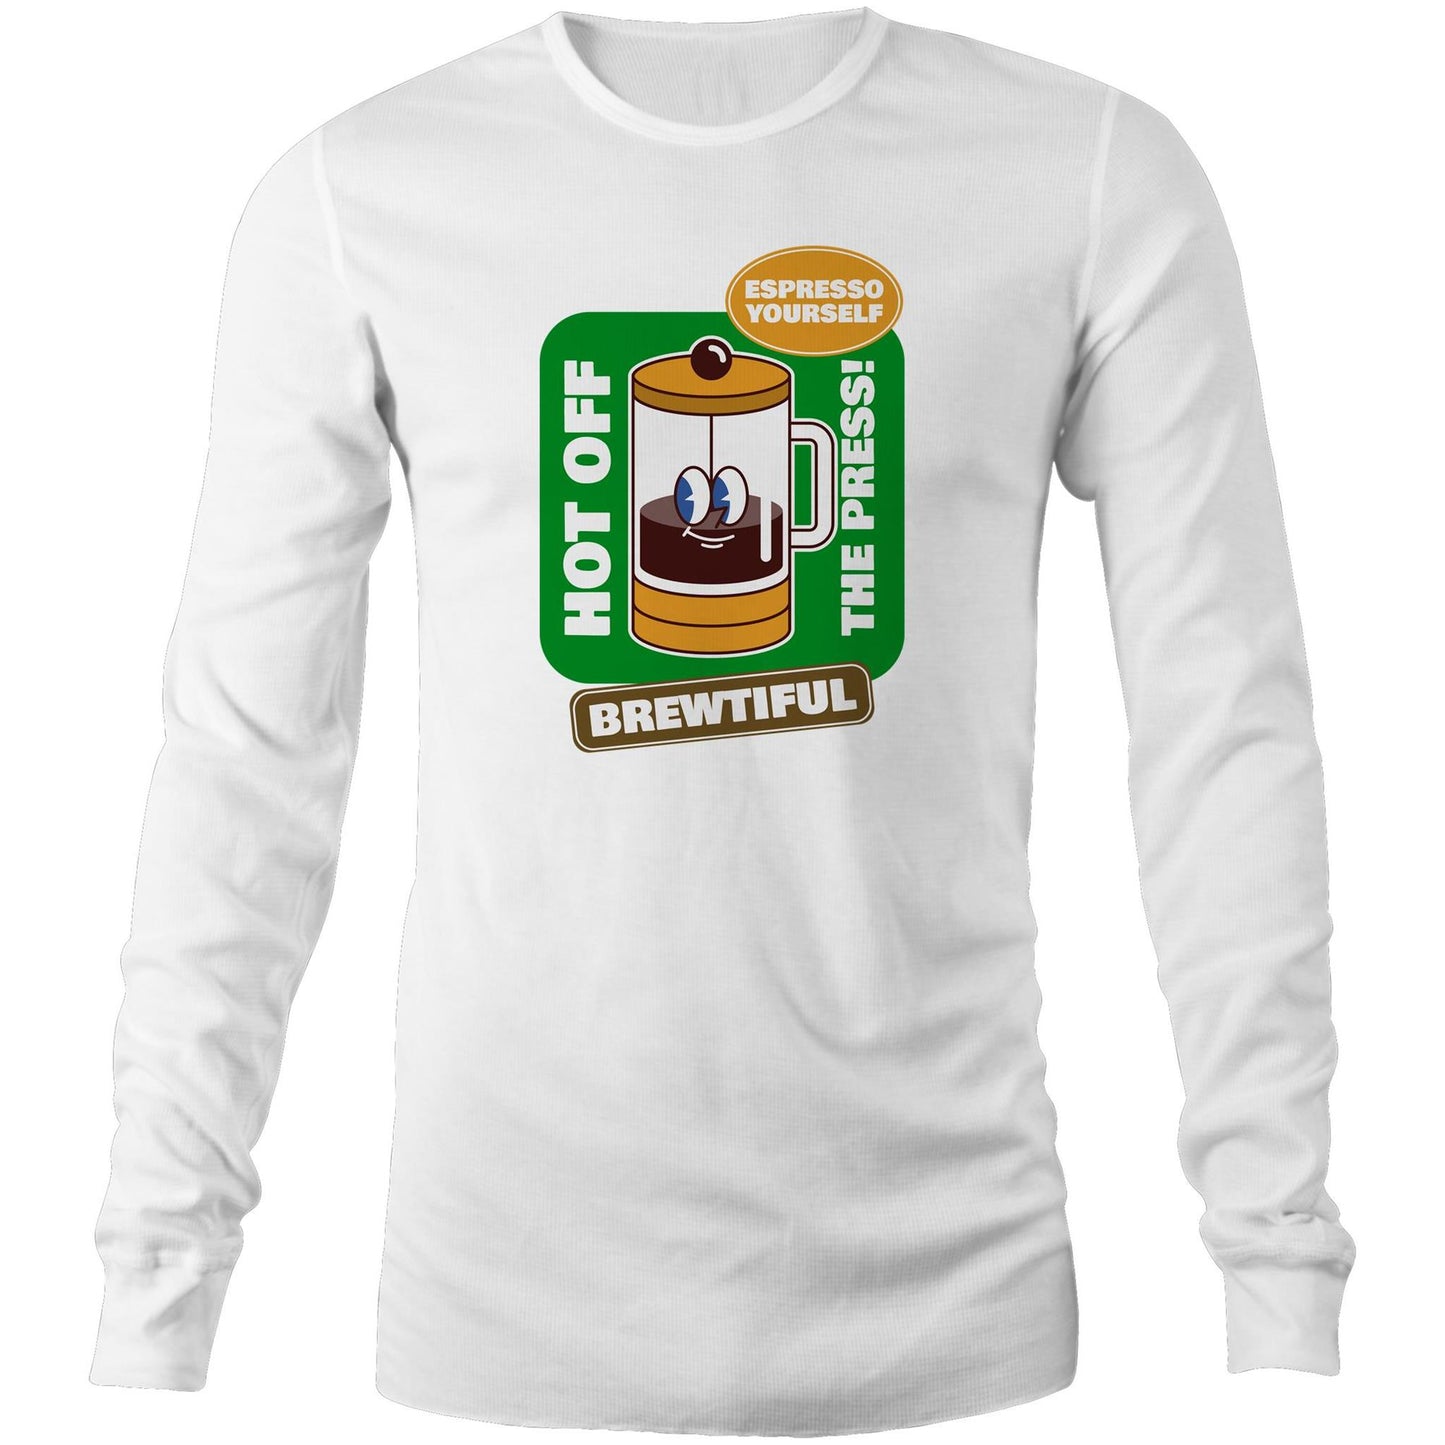 Brewtiful, Espresso Yourself - Long Sleeve T-shirt White Unisex Long Sleeve T-shirt Coffee